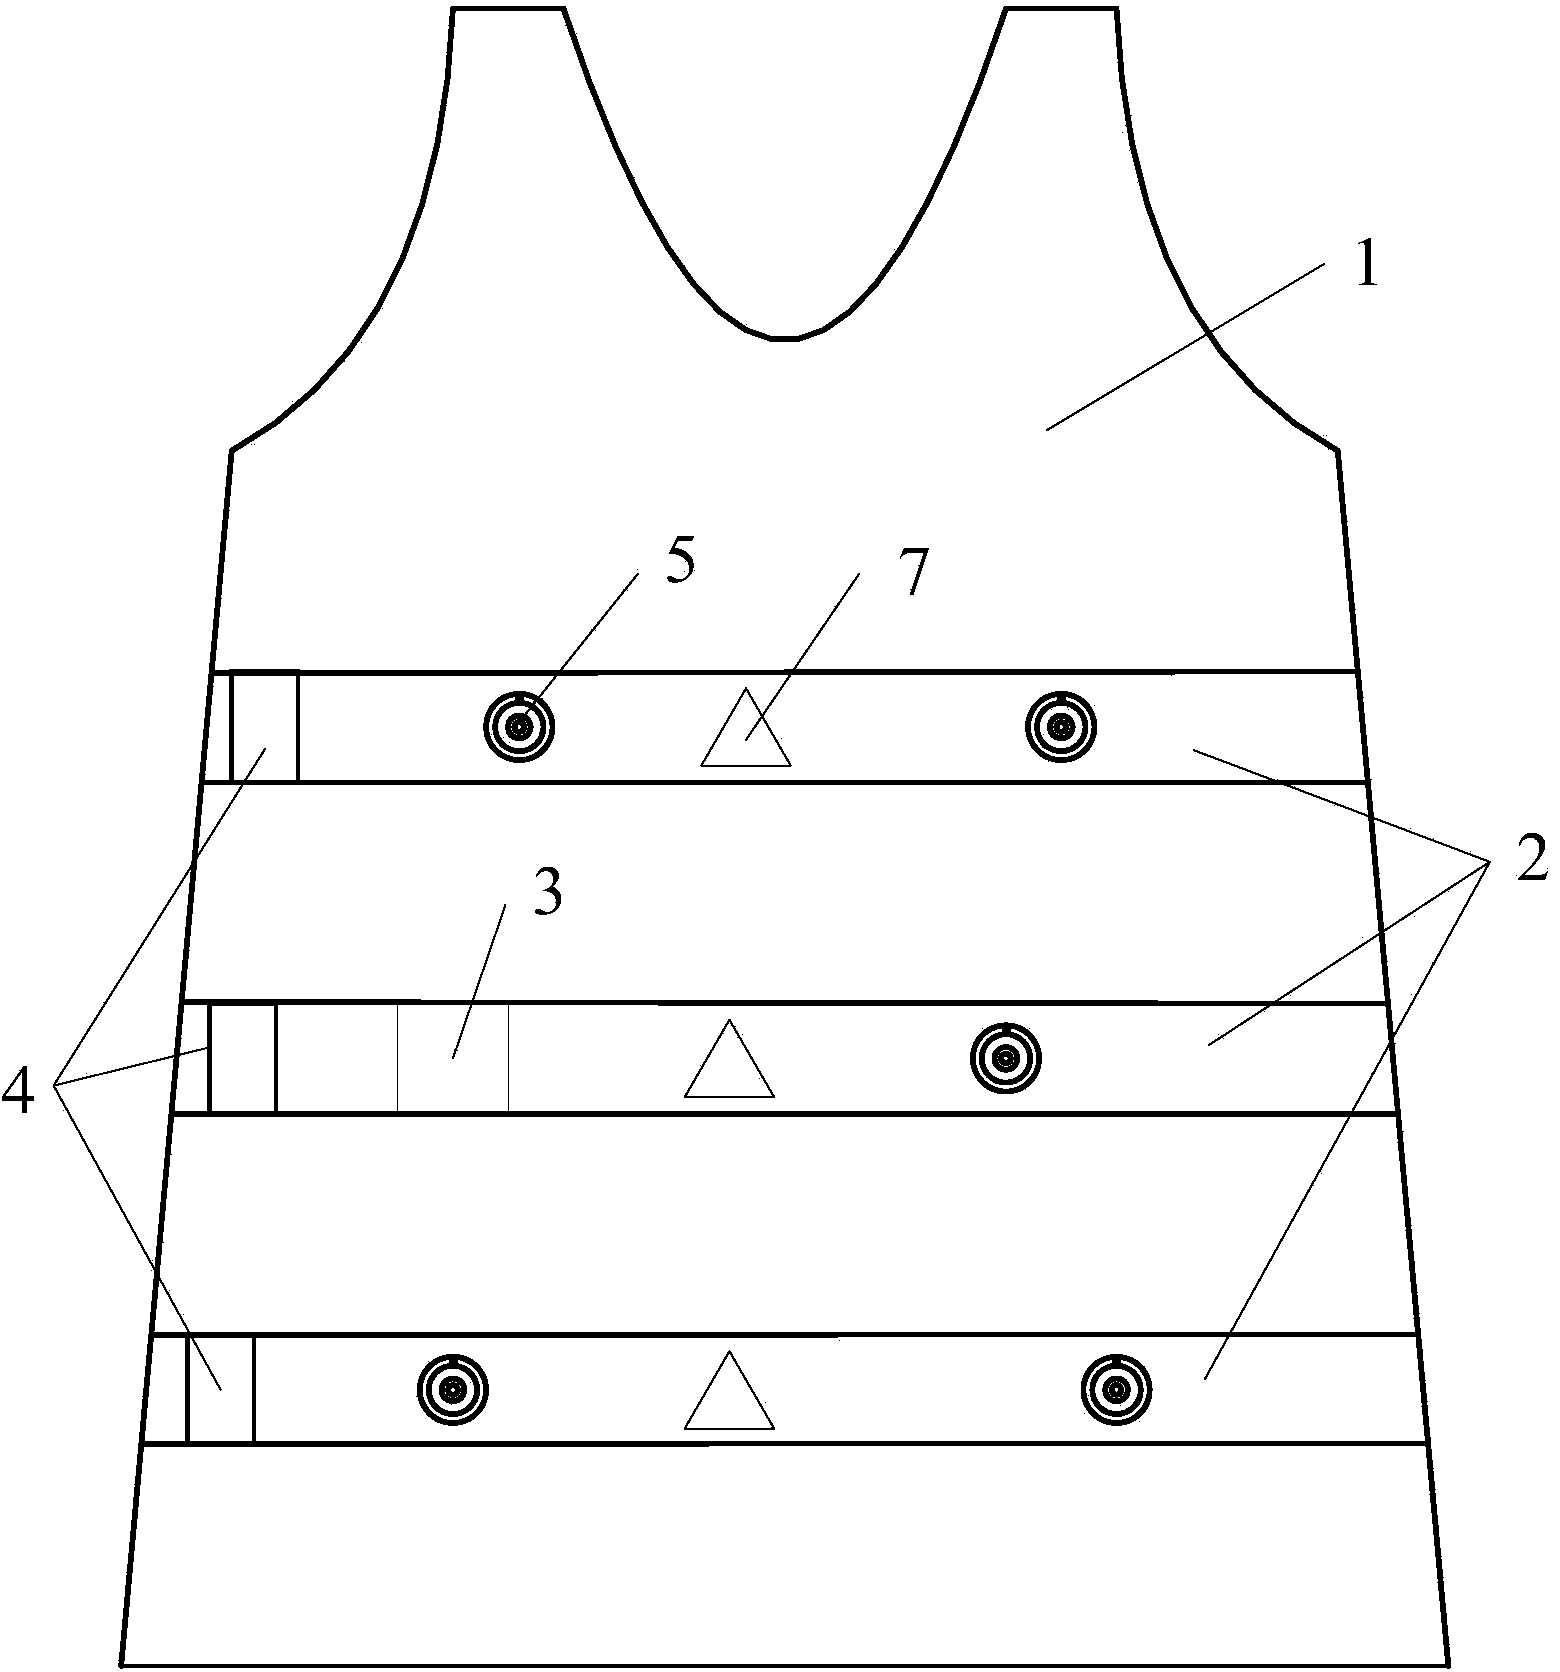 Wearable real-time electrical signal acquisition device